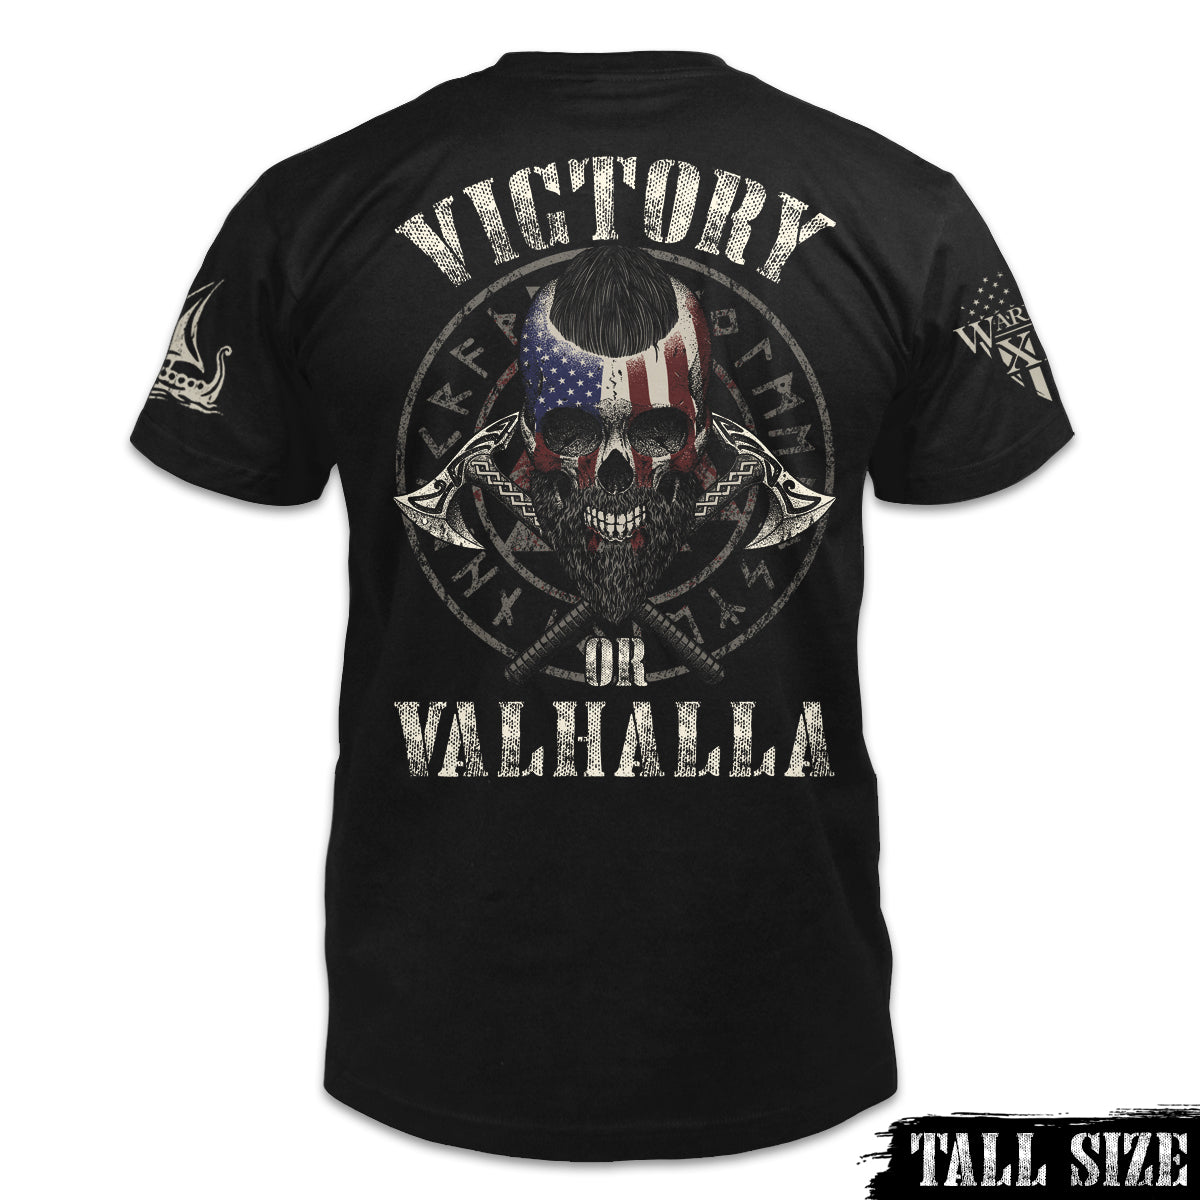 A black tall sized shirt with the words "Victory Or Valhalla" printed on the back of the American Viking shirt.